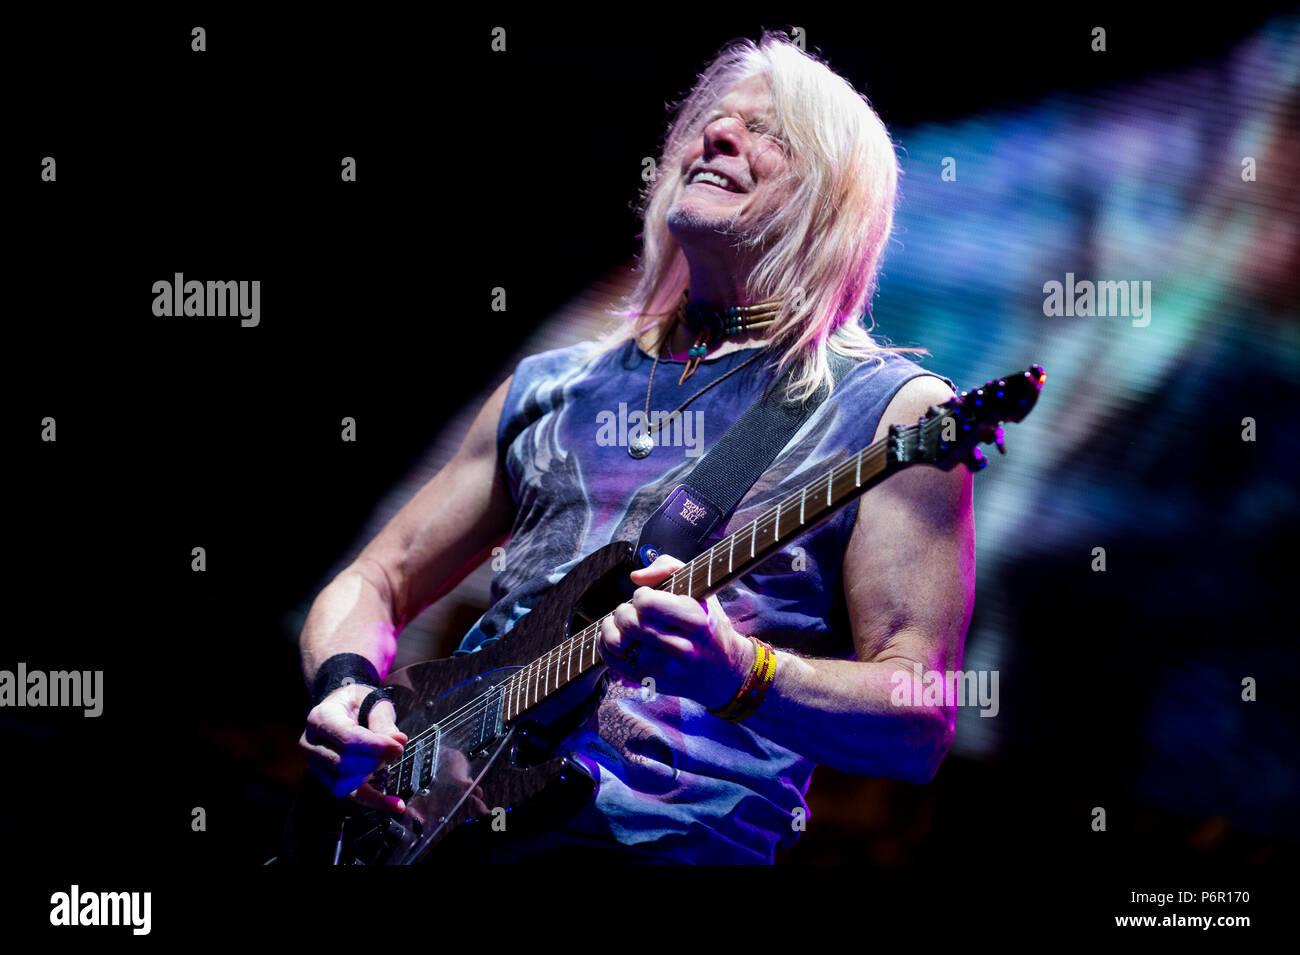 Deep Purple guitar player, Steve Morse performs. Deep purple band performs  at Tauron Arena Krakow as part of the farewell tour, The Long Goodbye Tour  Stock Photo - Alamy